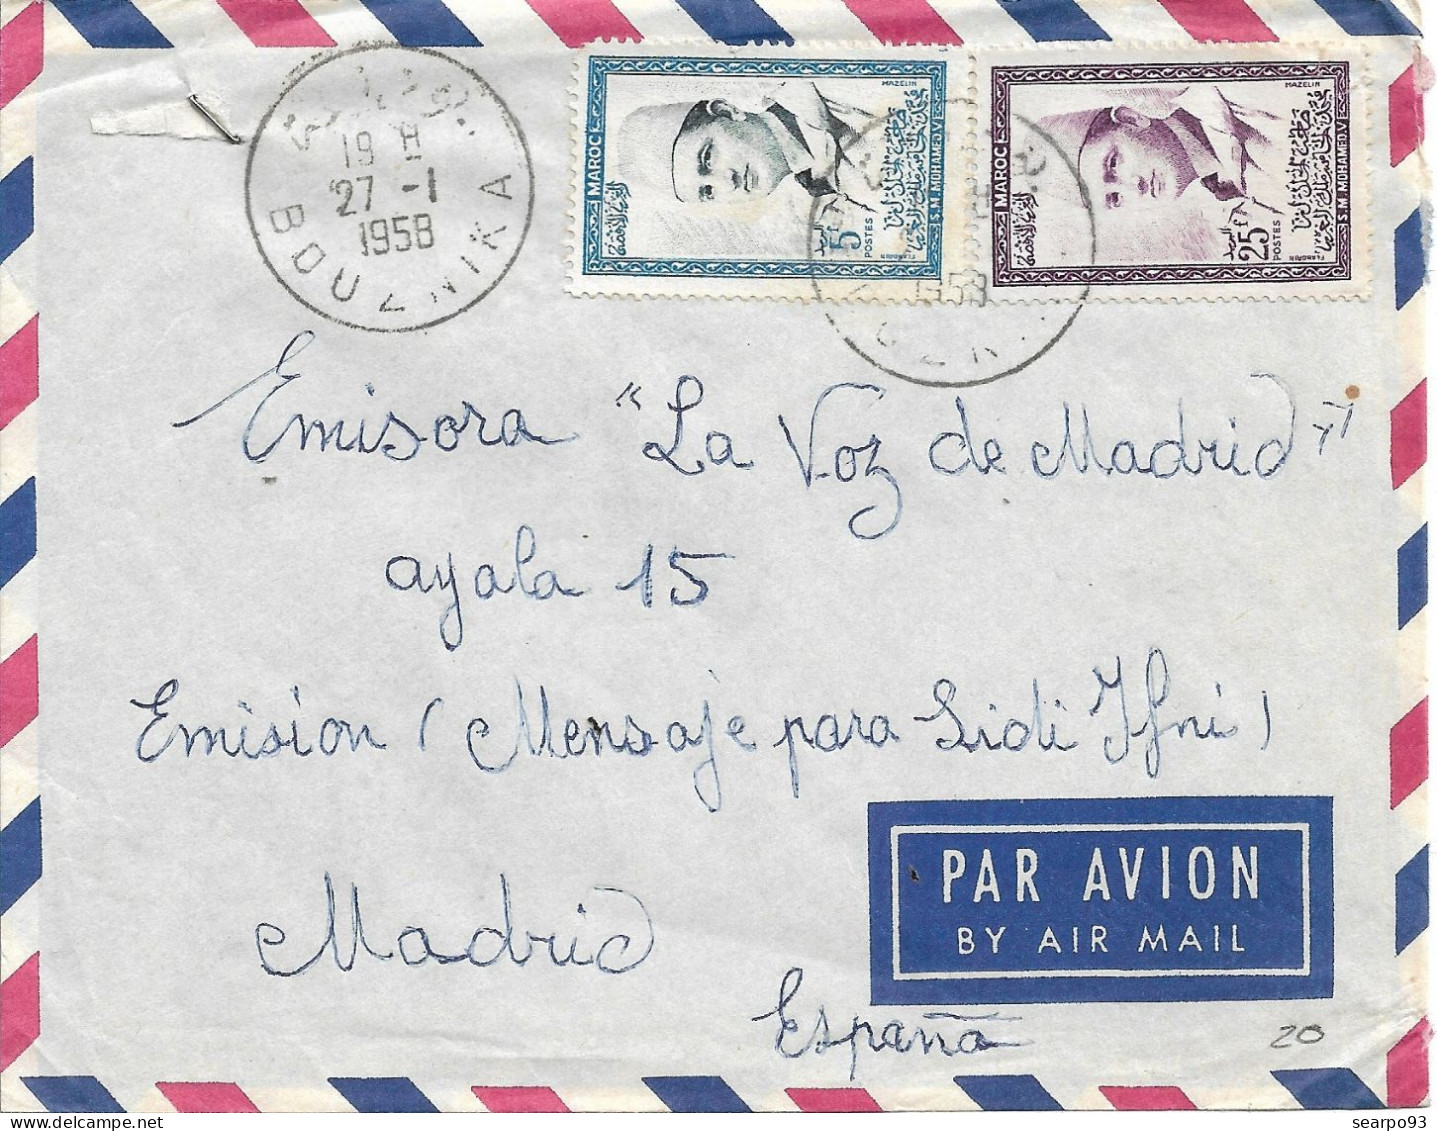 MOROCCO. COVER FROM BOUZNIKA TO MADRID. 1958. AIR MAIL - Morocco (1956-...)